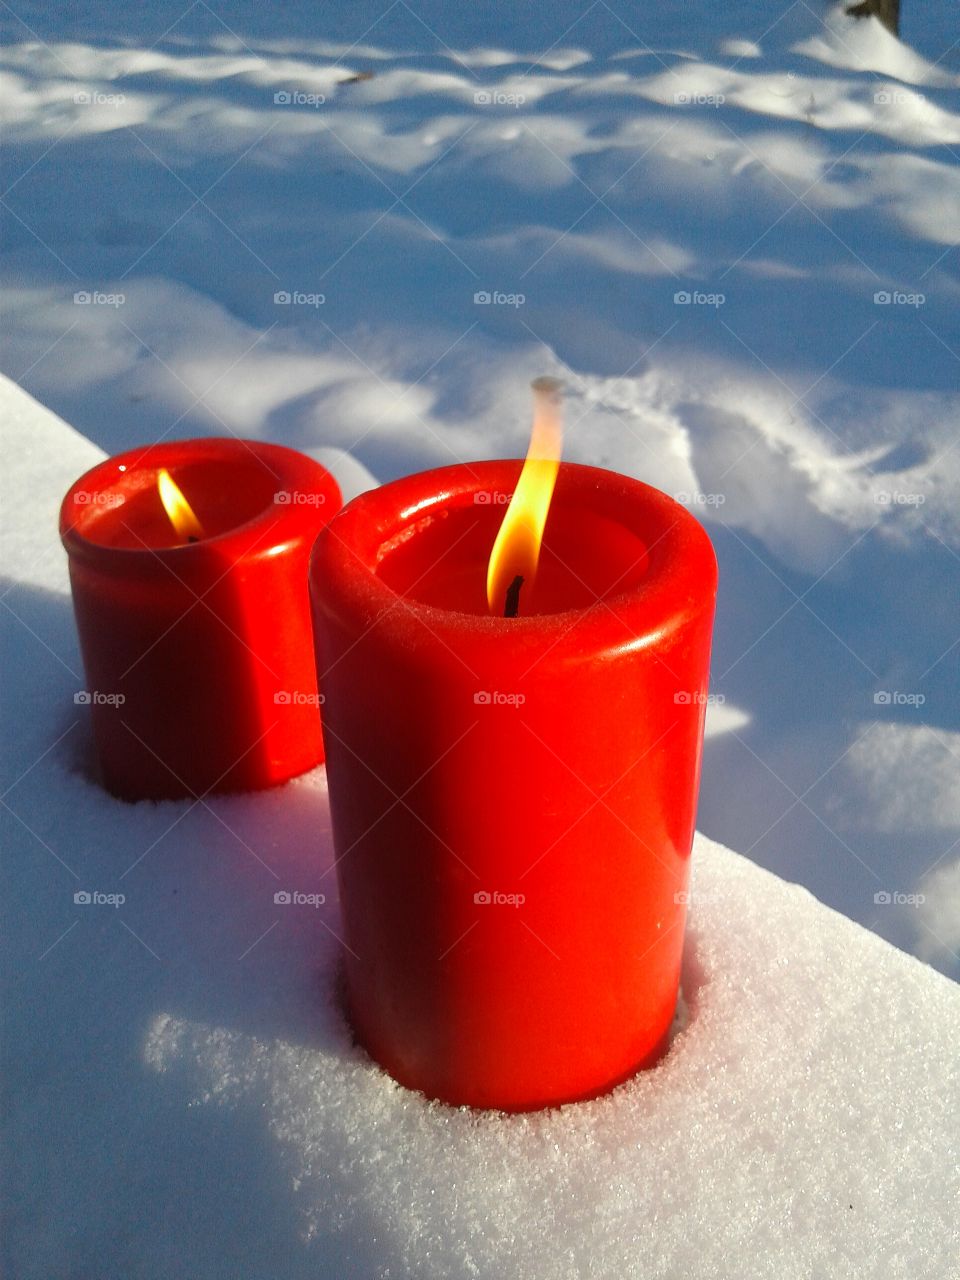 Glowing candles in snow